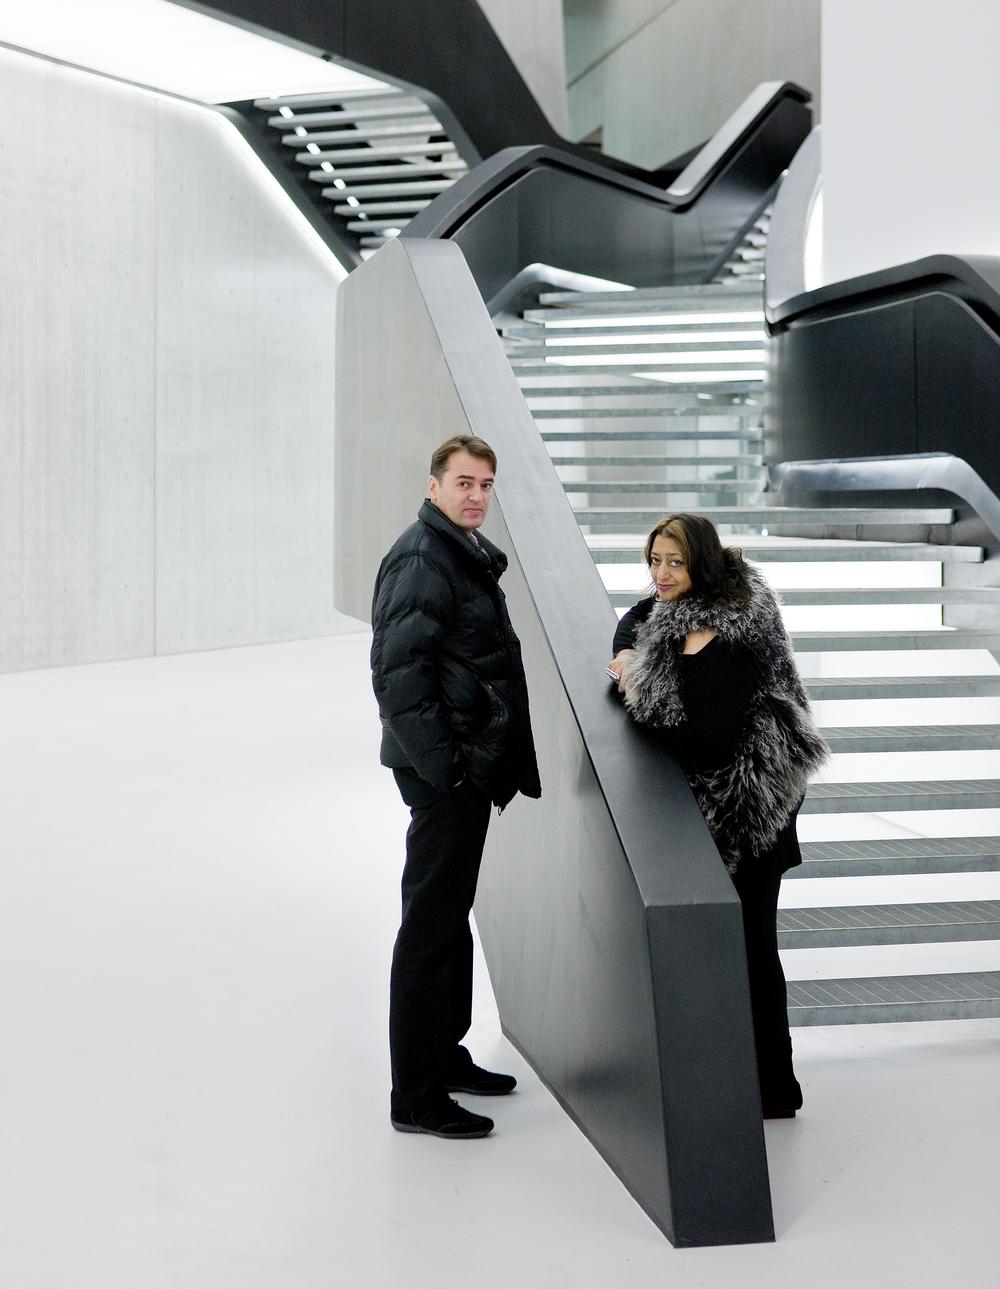 Zaha Hadid and Patrik Schumacher at MAXXI National Museum of XXI Arts, which won the Stirling Prize in 2010 / PHOTO: IWAN BAAN